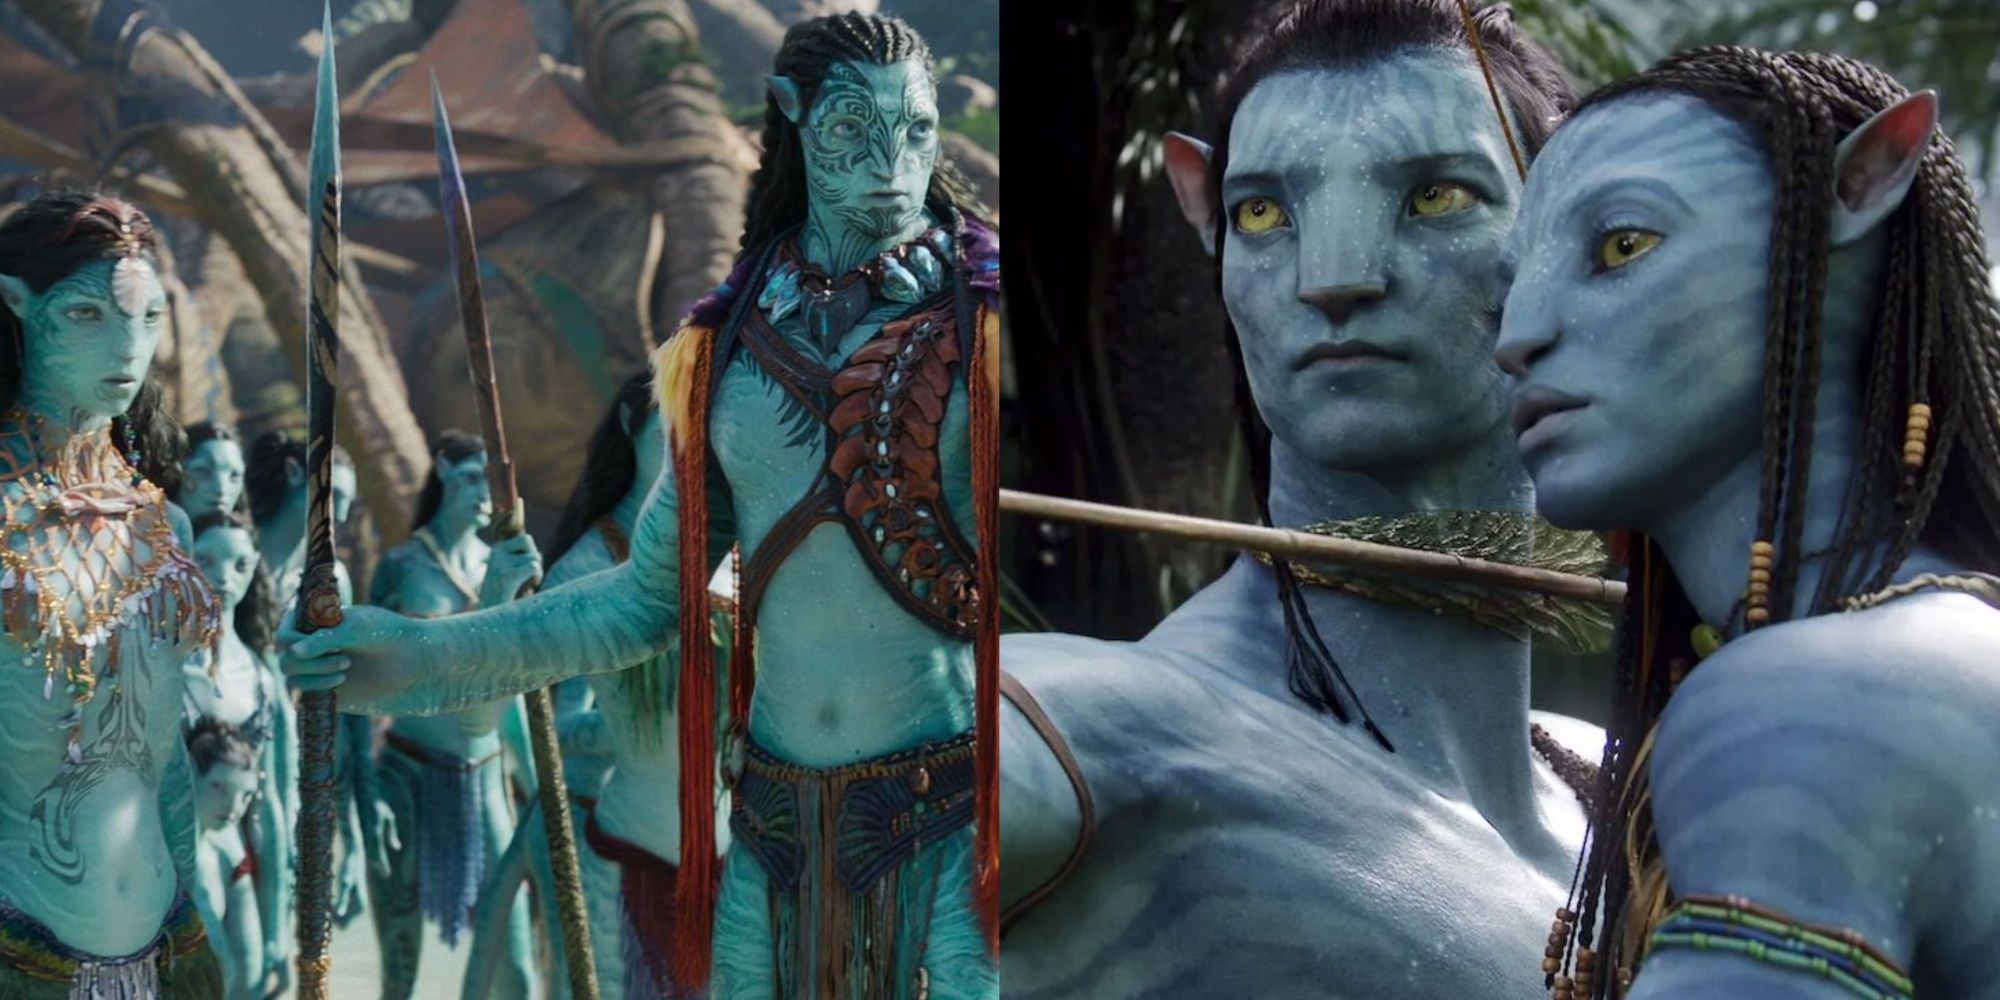 Screenshot of the water Na'vi Tonowari and Rowal from Avatar: The Way Of Water (left), and Jake Sully and Neytiri from Avater (right)